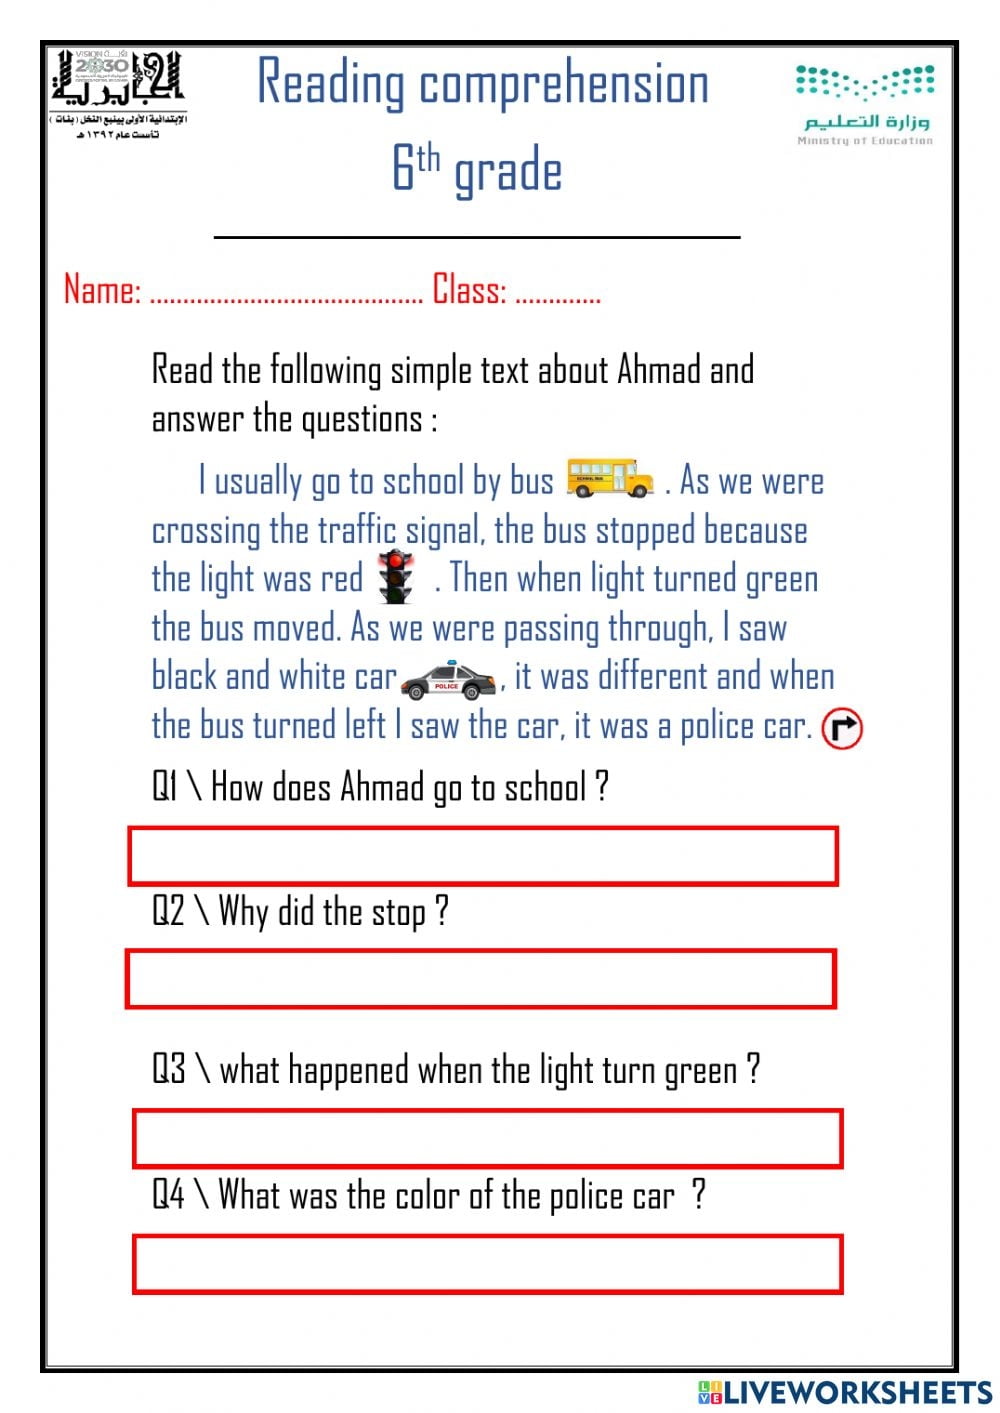 Reading Comprehension Online Exercise For 5th Grade